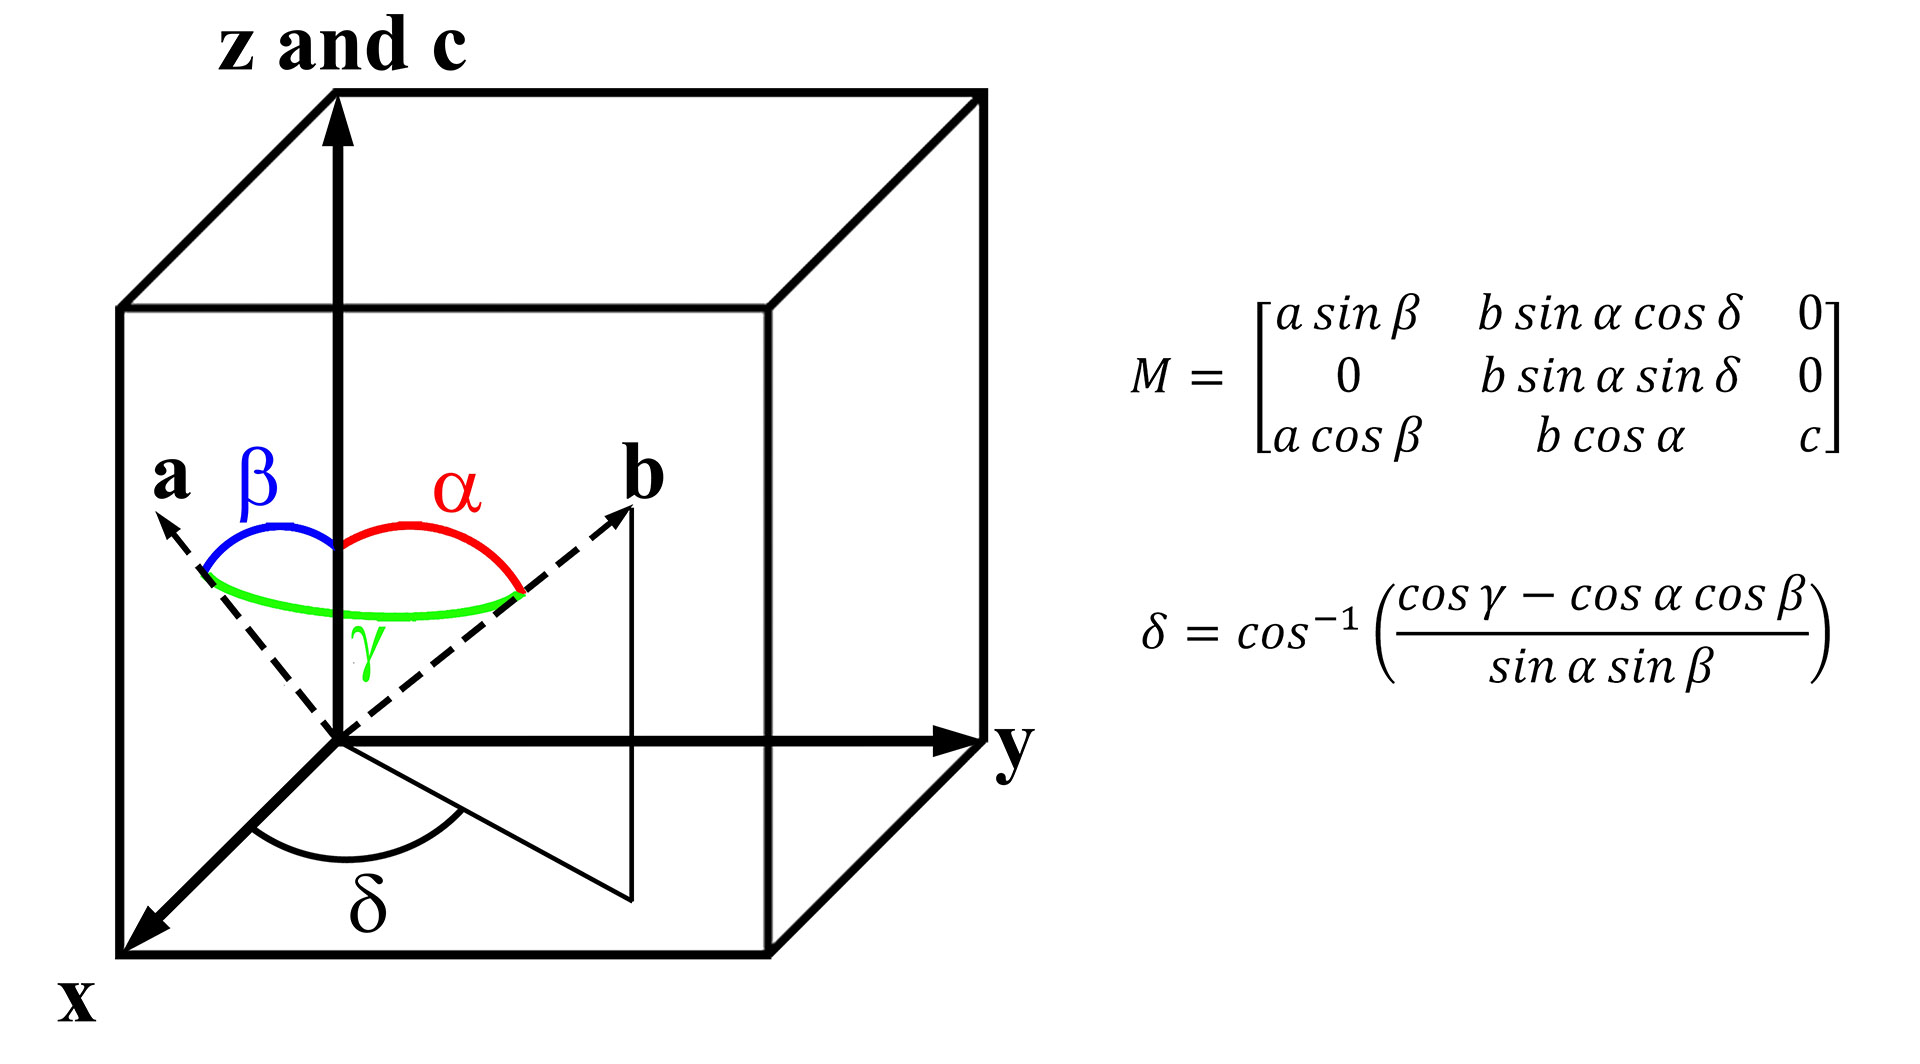 Schematic illustrating how to convert any non-cubic
vector coordinate system into a cubic system and the conversion matrix
(M).